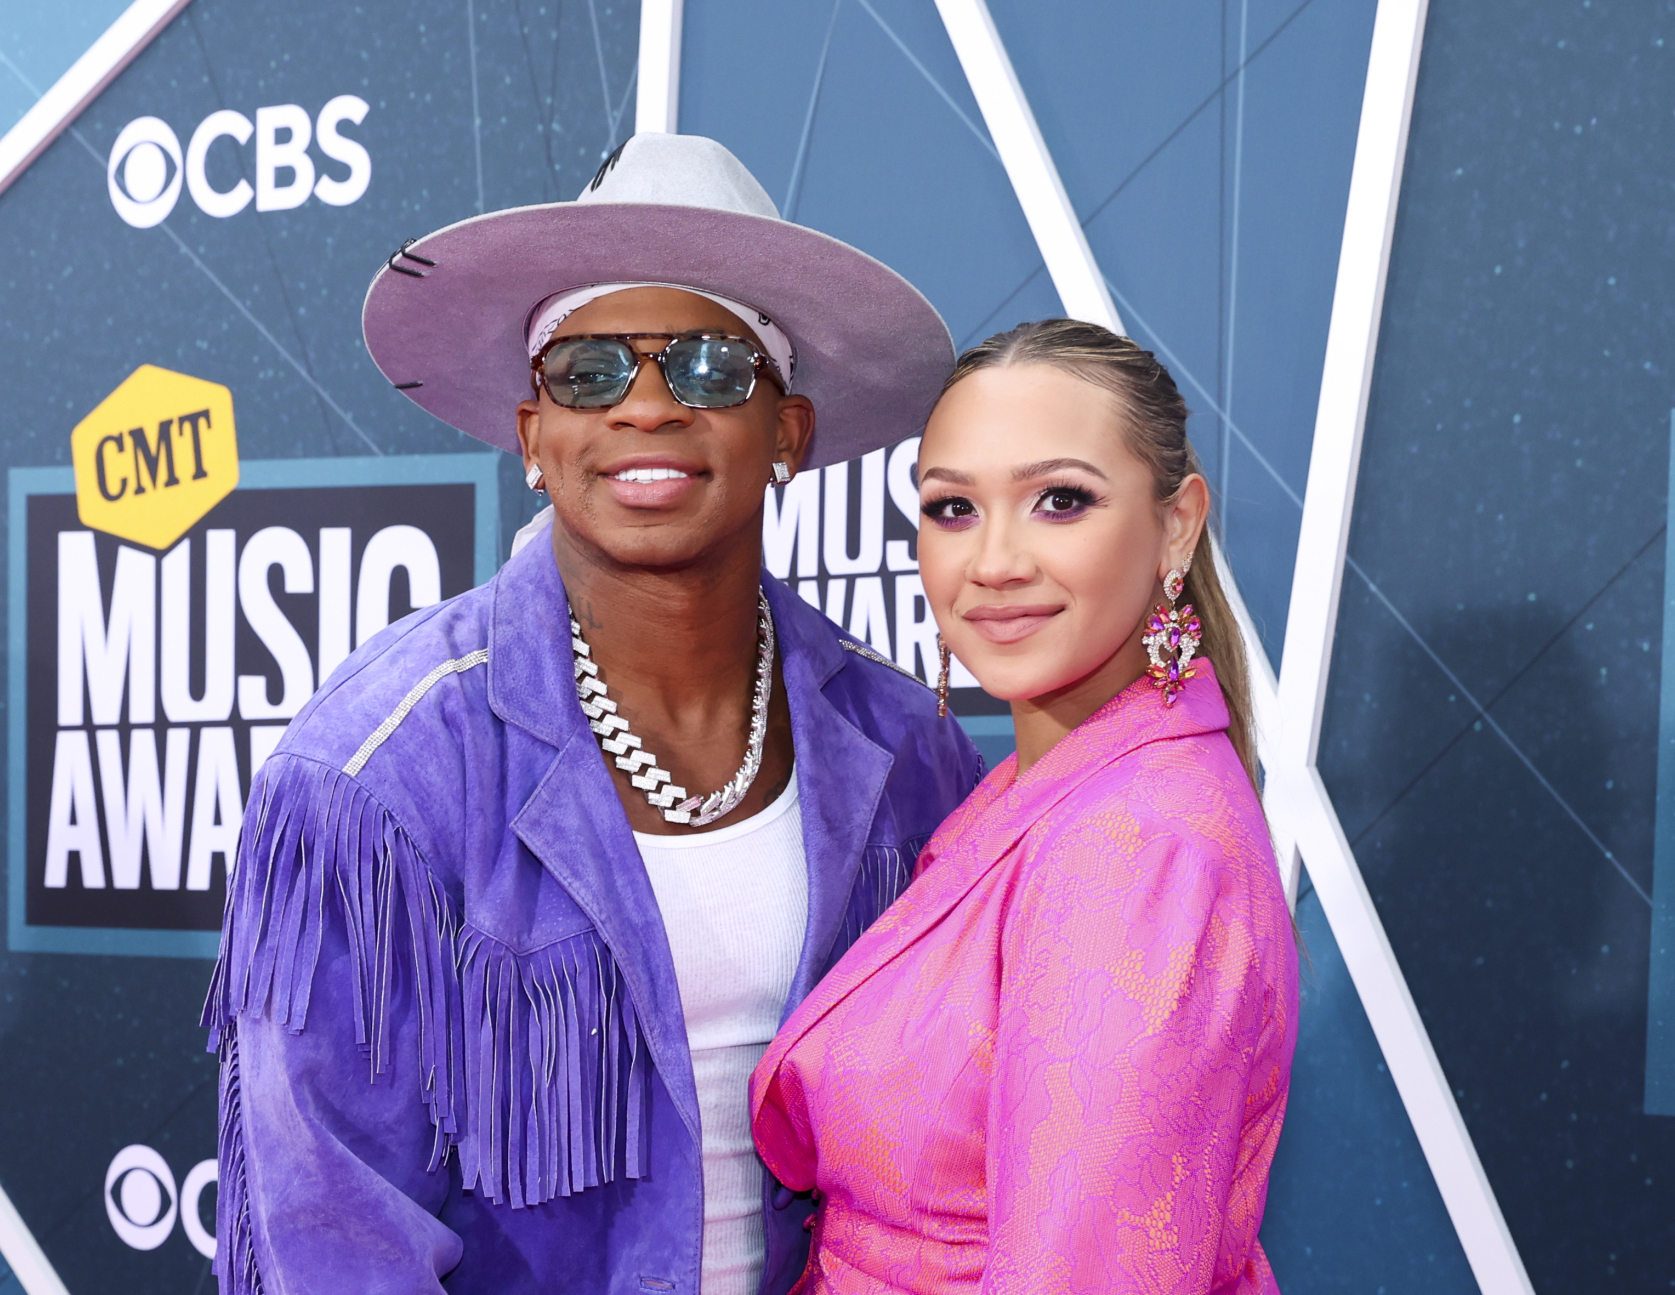 Jimmie Allen, country star, apologizes for humiliating his estranged wife with an affair and admits to being a poor example of a man and a father.